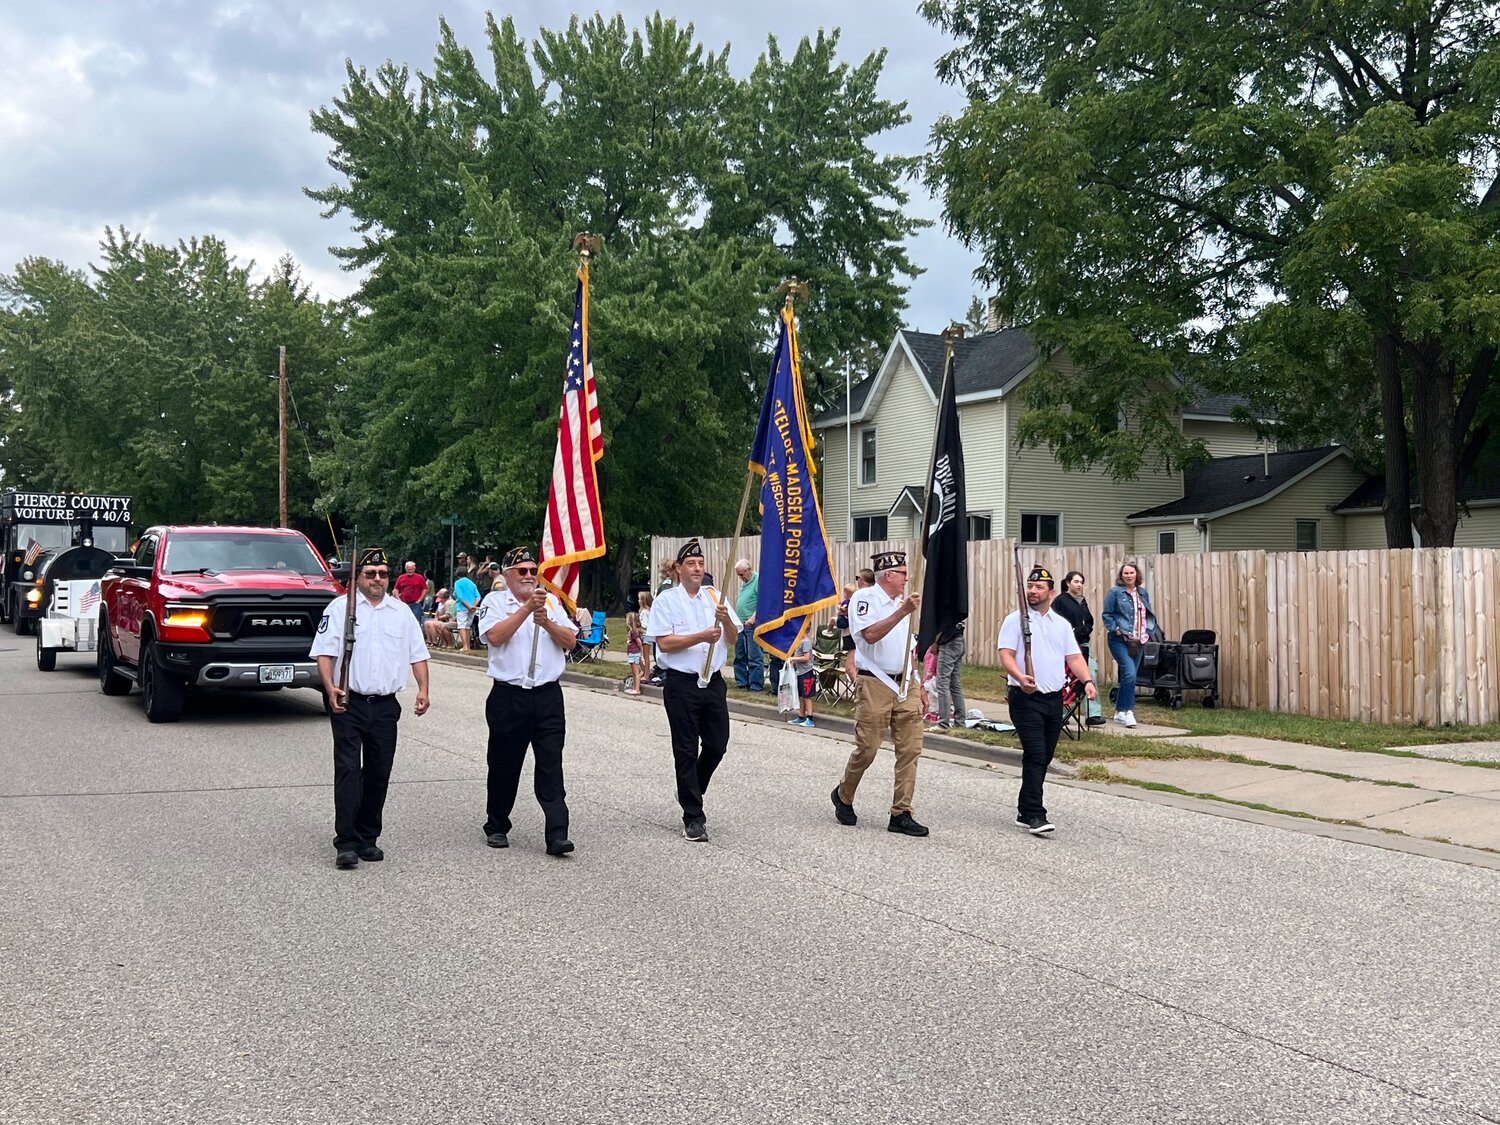 The Prescott American Legion Post Color Guard was one of the lead entrants in the Prescott Daze Grand Parade on Sunday, with viewers standing at attention as the flags were marched past. The parade featured nearly 50 floats.